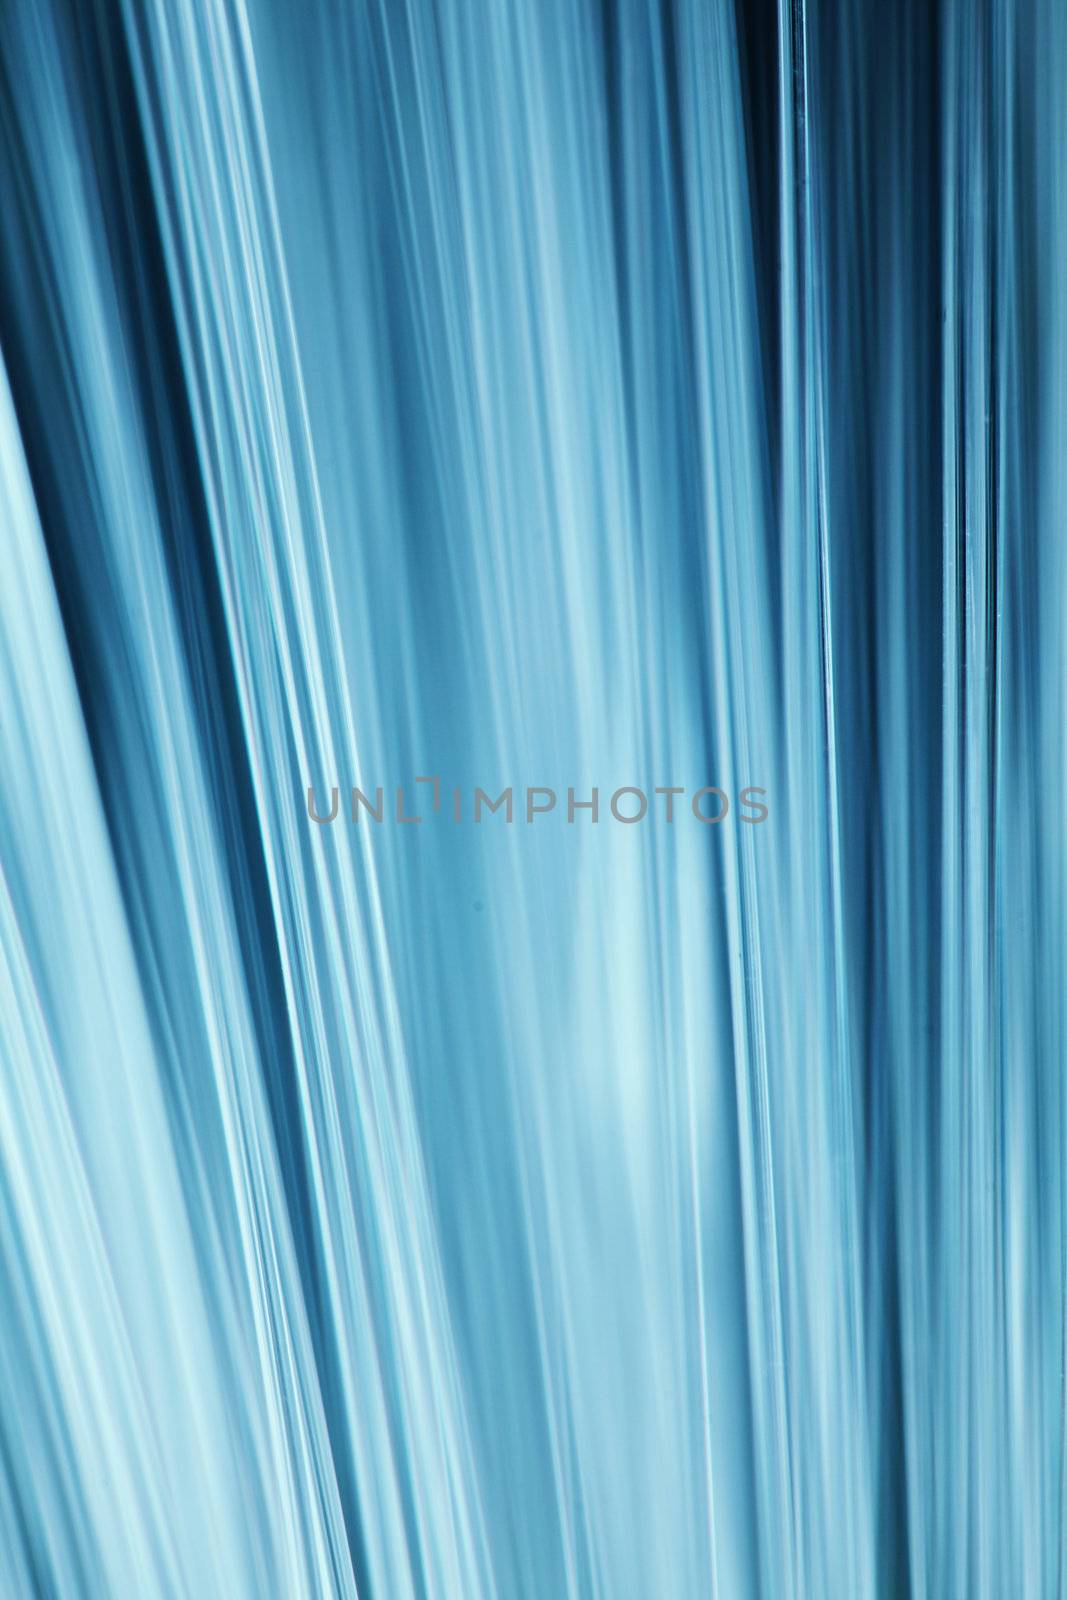 abstract blue background macro close up